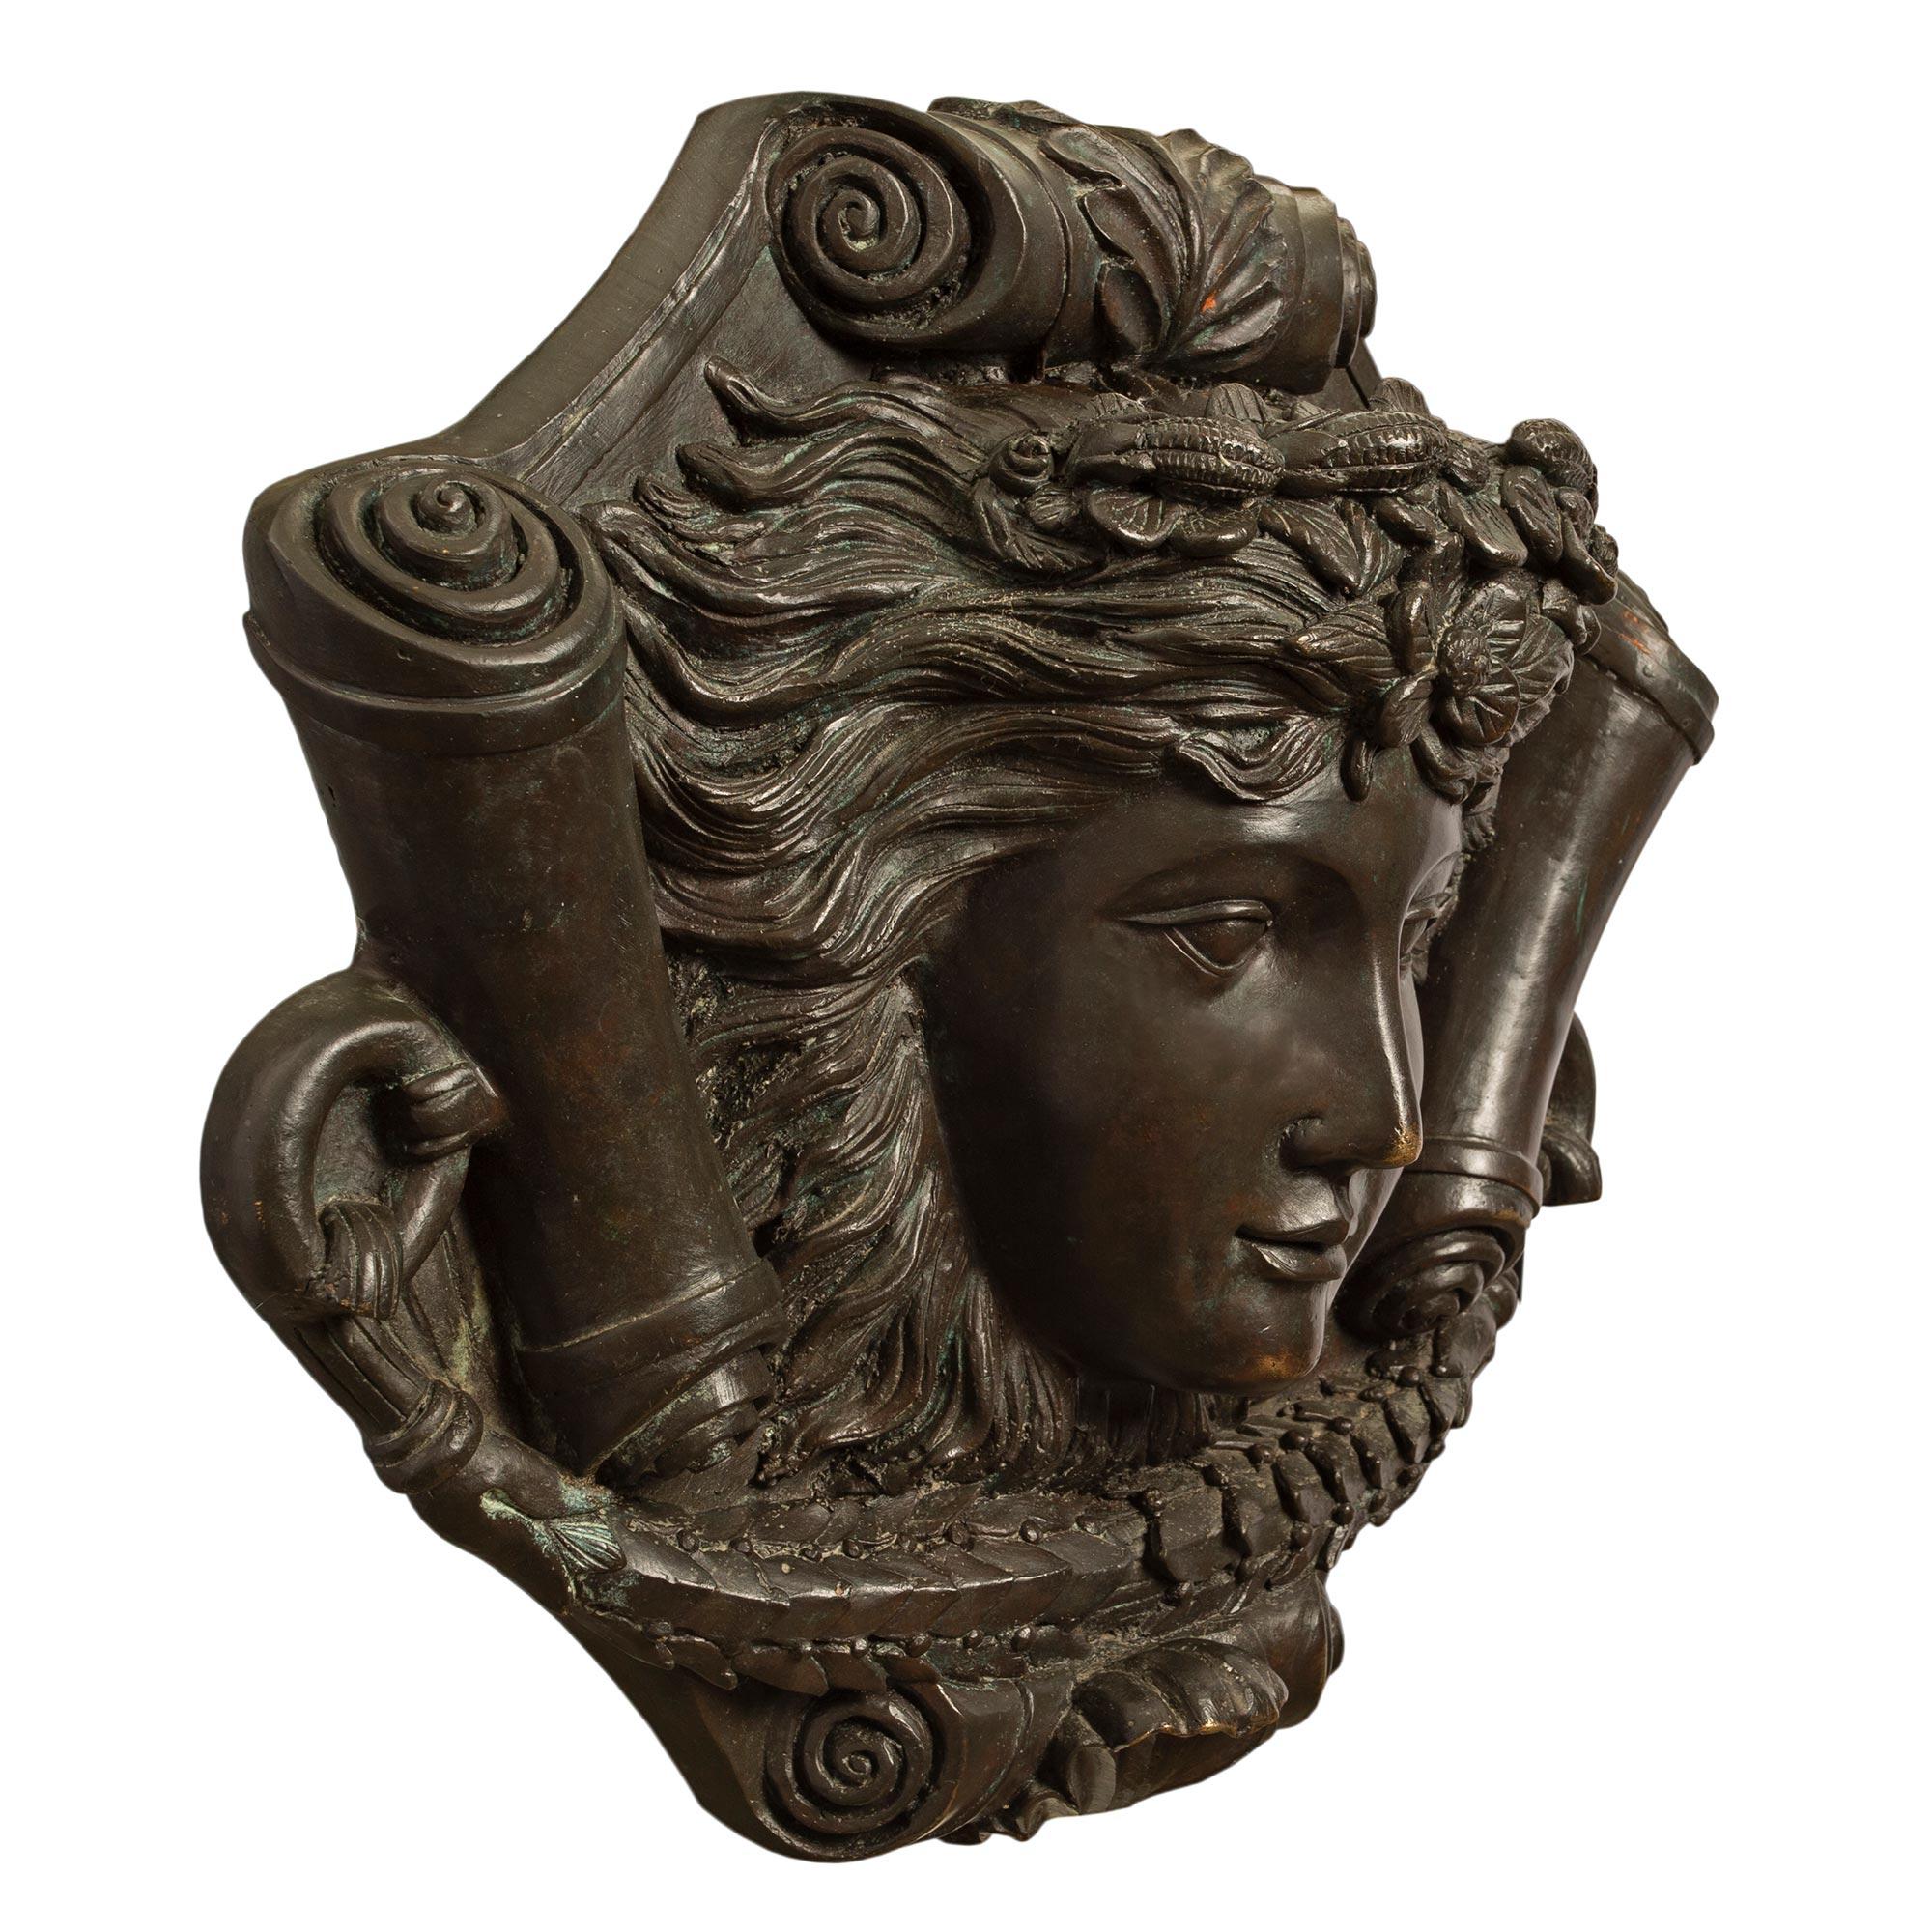 A fine quality and handsome French 19th Louis XVI st. patinated bronze decorative wall plaque. The center of the plaque has a richly chased female mask with flowers in her hair. Her eyes are open and she is flanked by rolled scrolls. At each side is